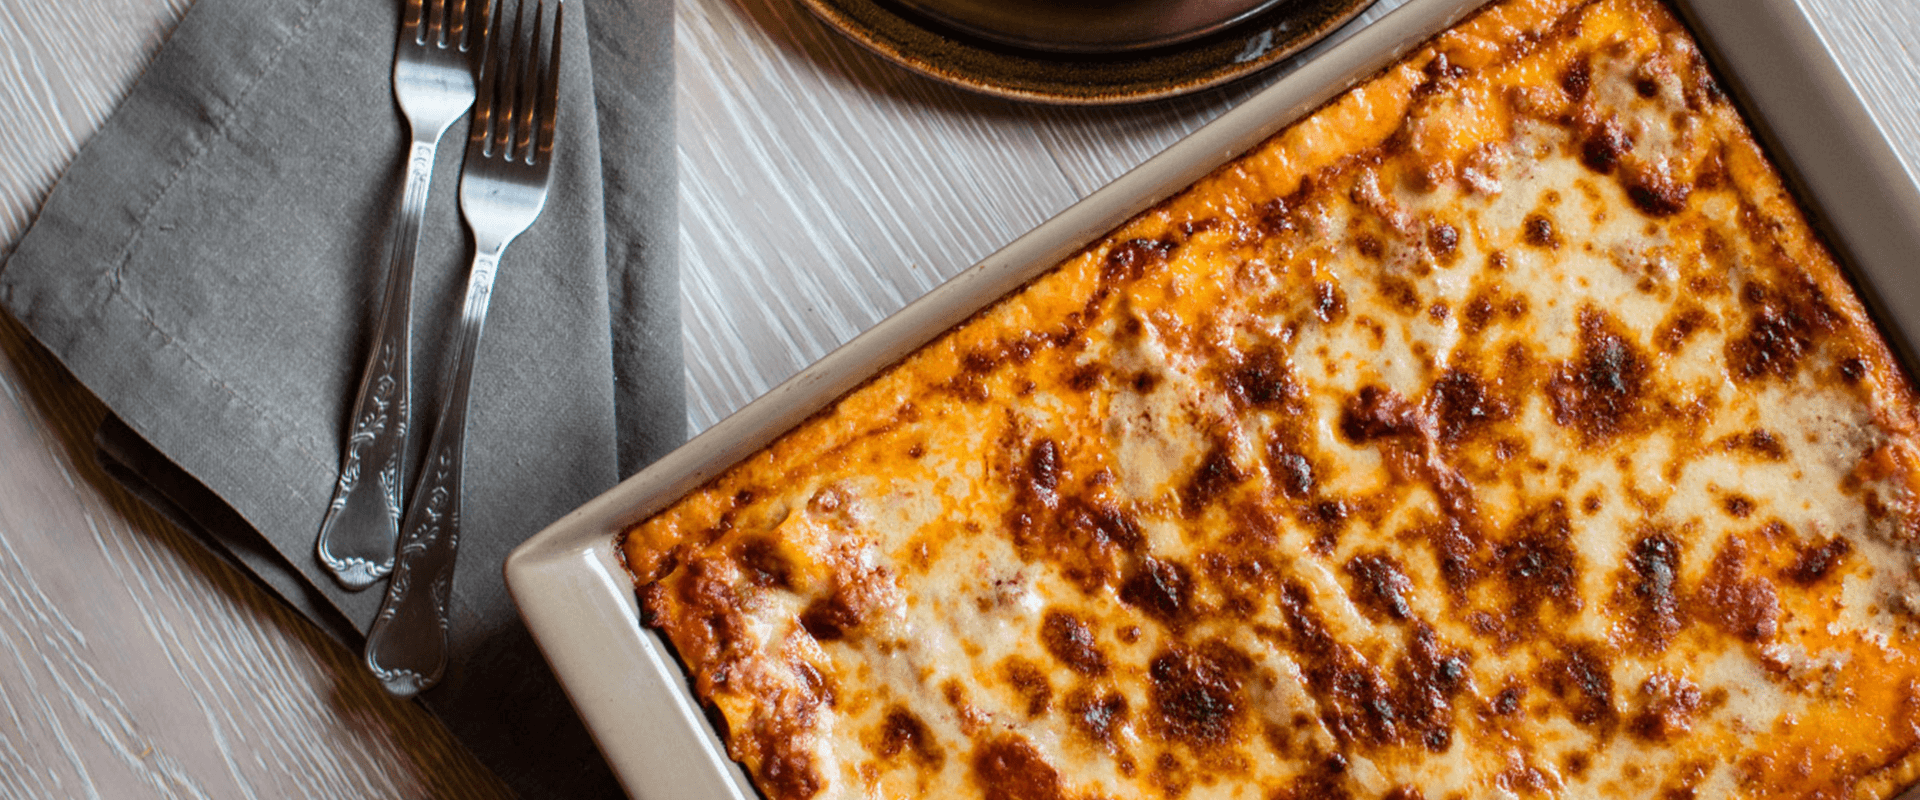 CA_LASAGNE-BOLOGNESE-WITH-RICOTTA_1920x800.png